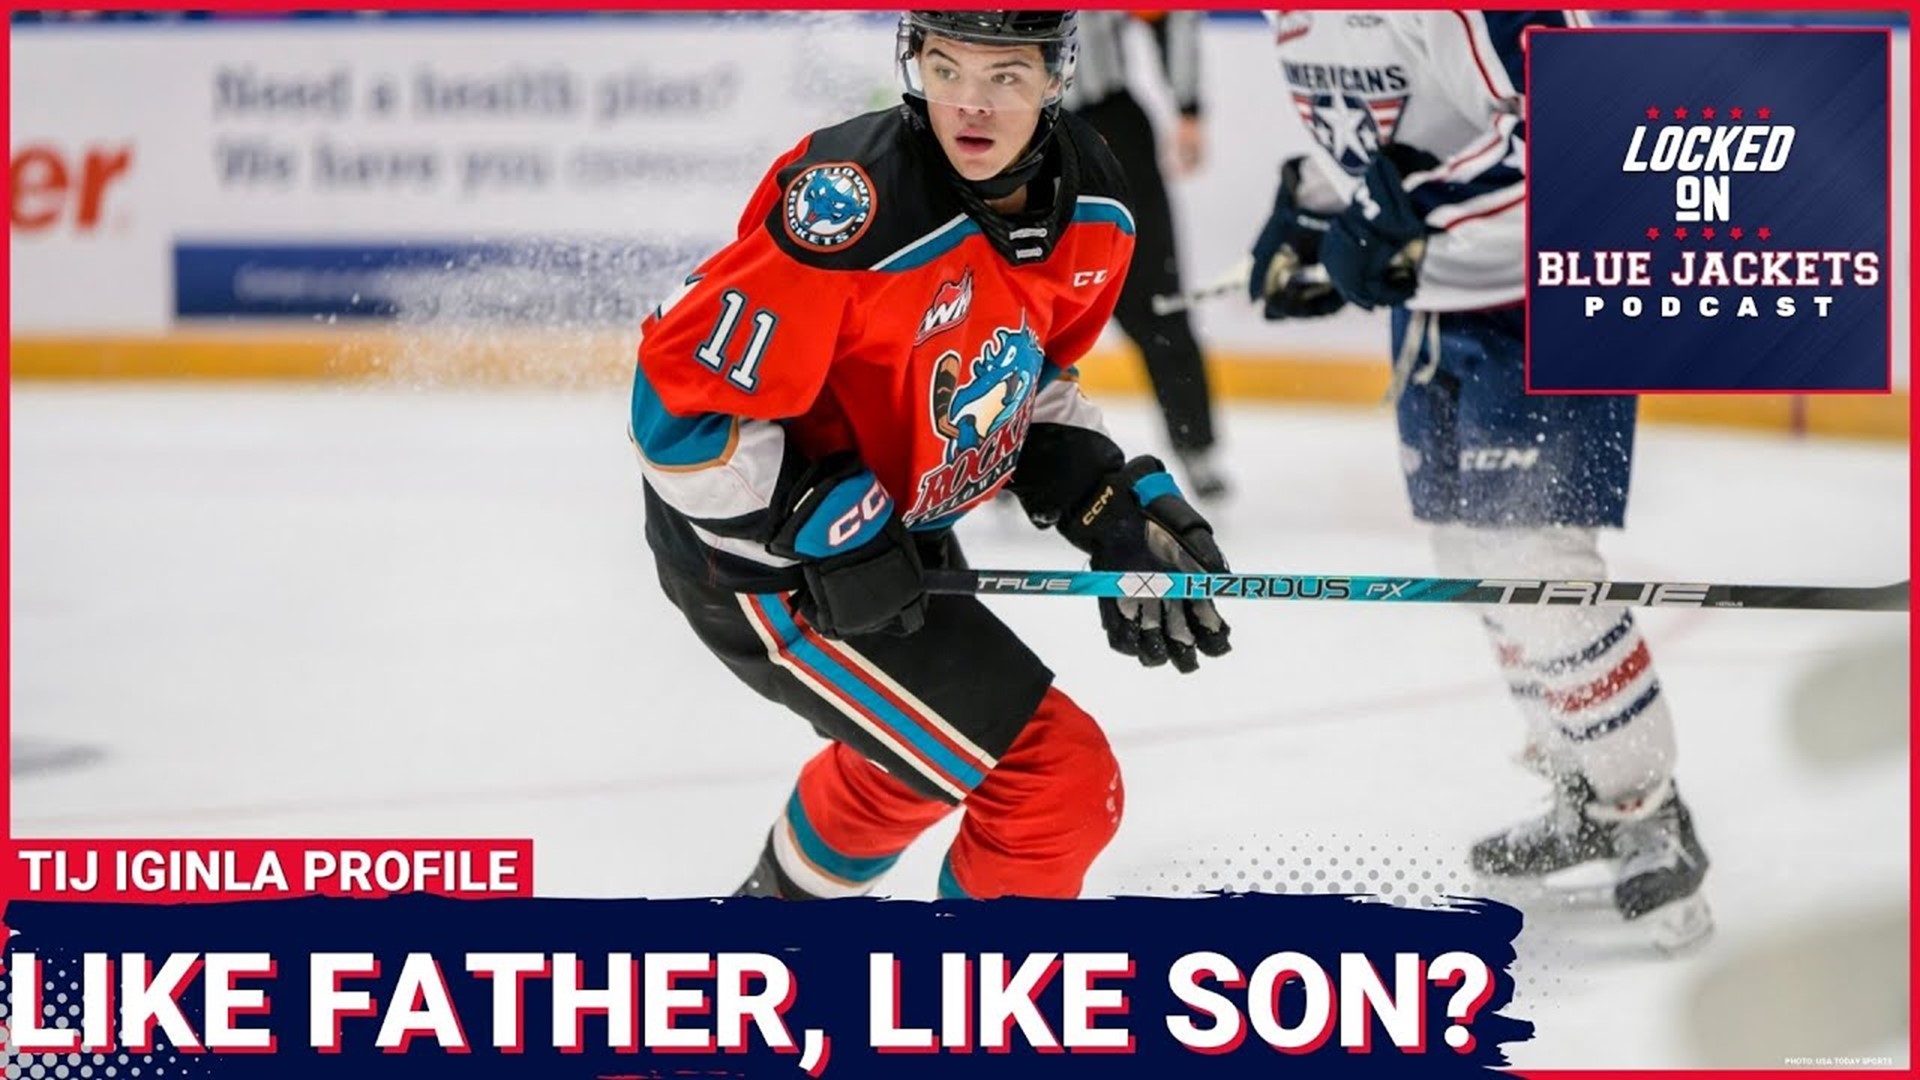 Son of Jarome Iginla, Tij Iginla is a chip off the old block. Derek Neumeier of McKeen's Hockey stops by to talk about his game